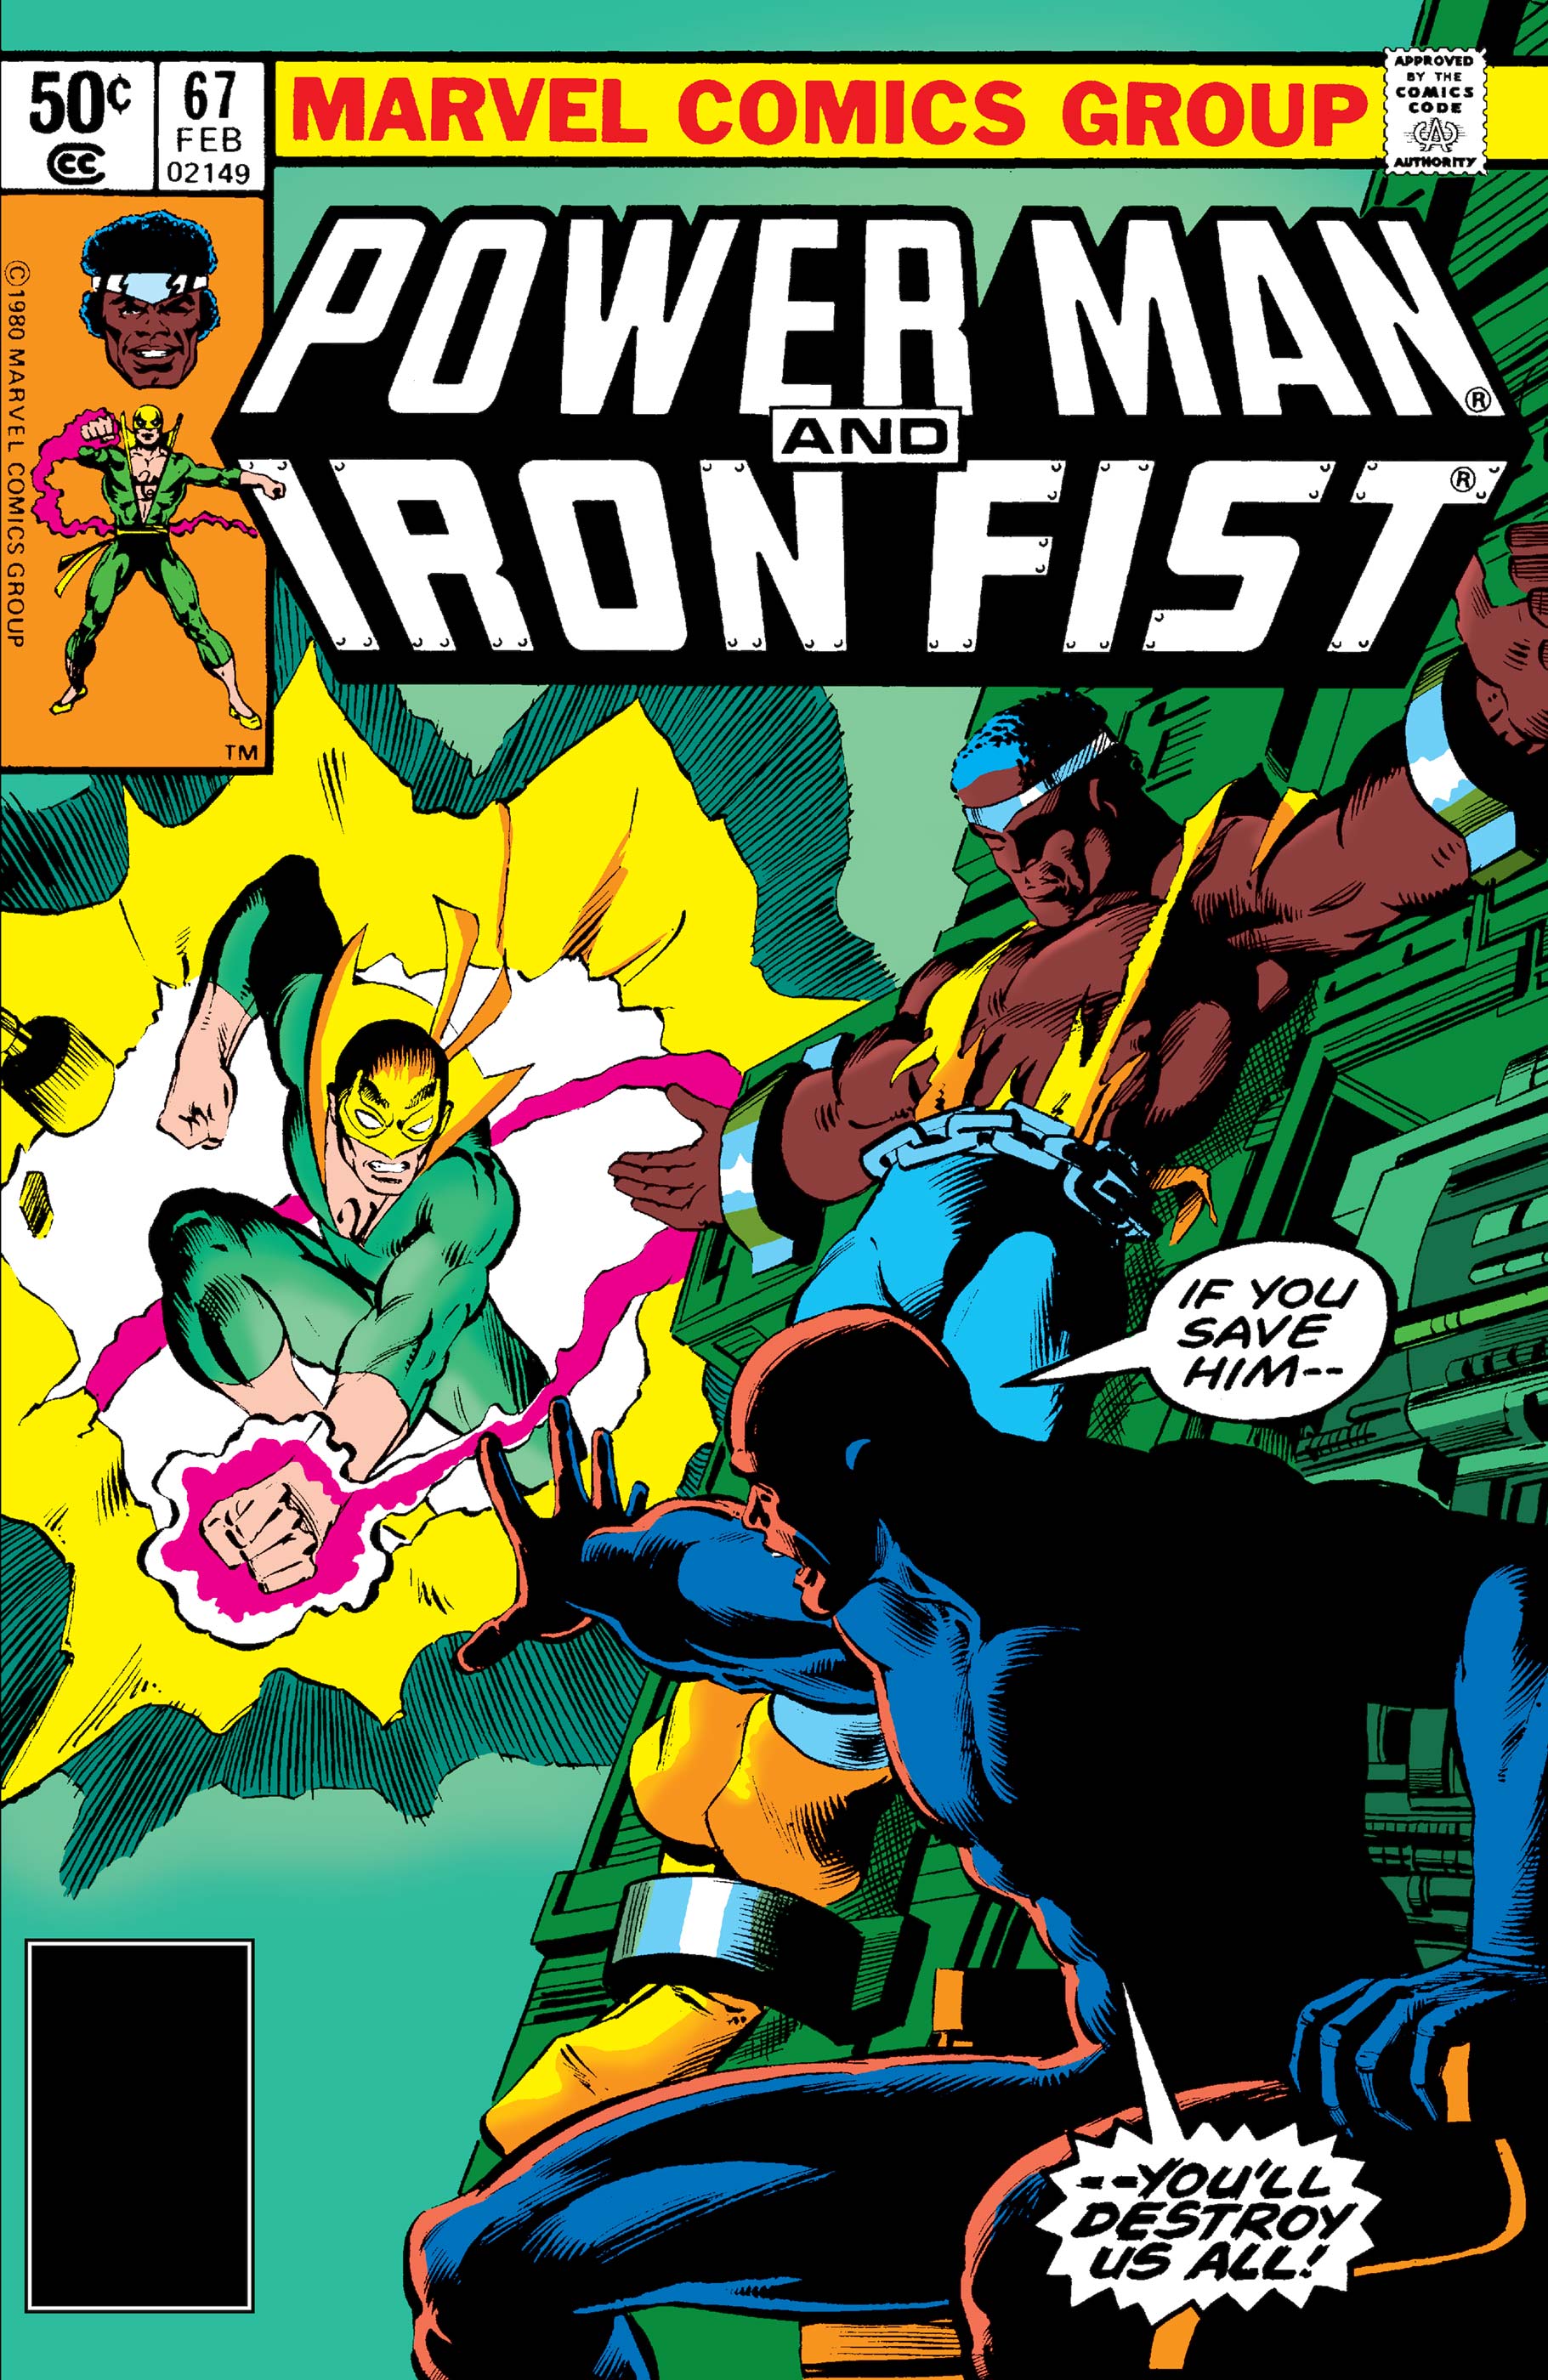 Power Man and Iron Fist (1978) #67